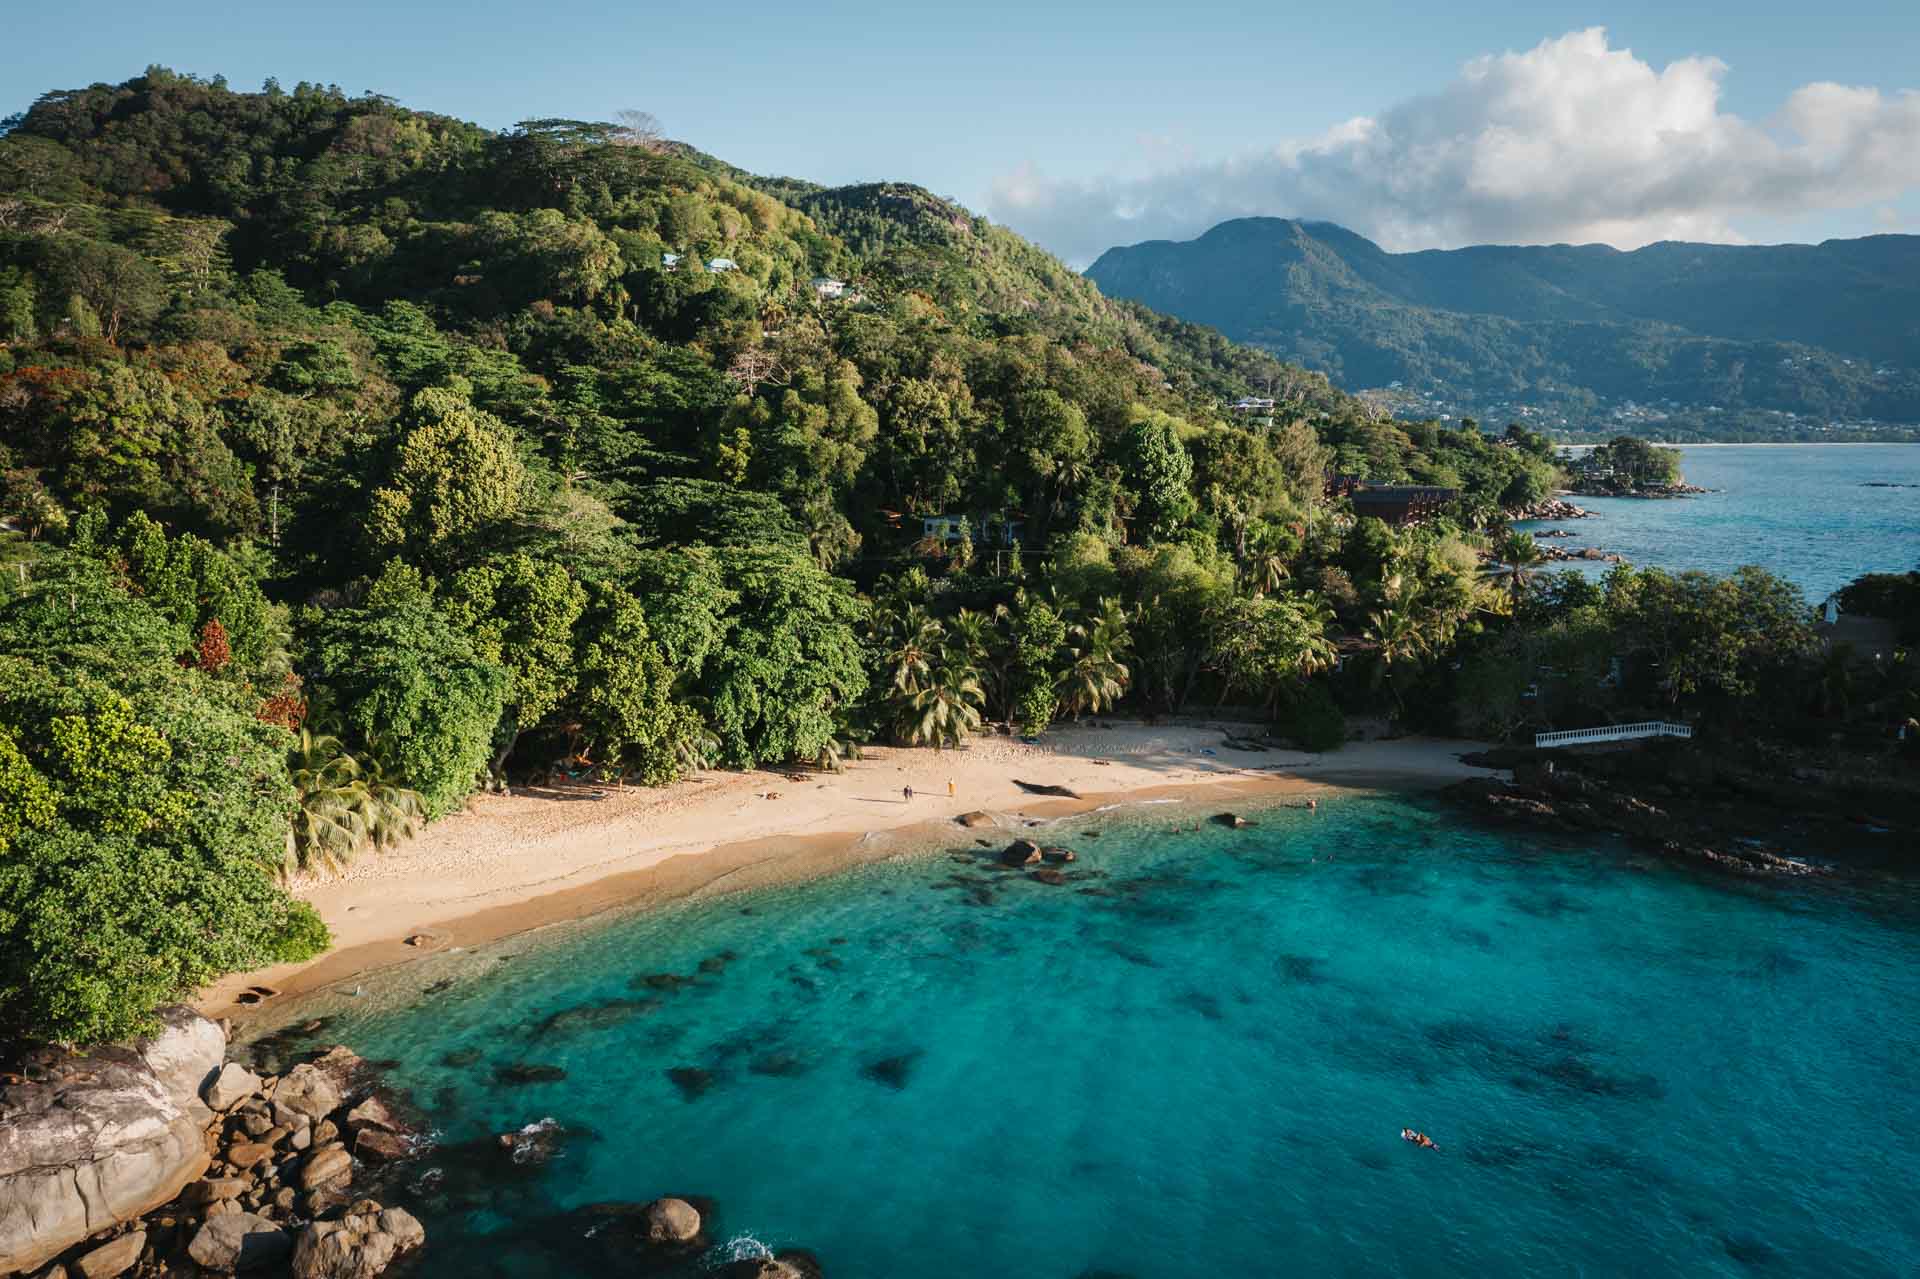 things to do in mahe, things to do in mahe island, things to do on mahe seychelles, mahe island, mahe island seychelles, places to visit in mahe, what to do in mahe